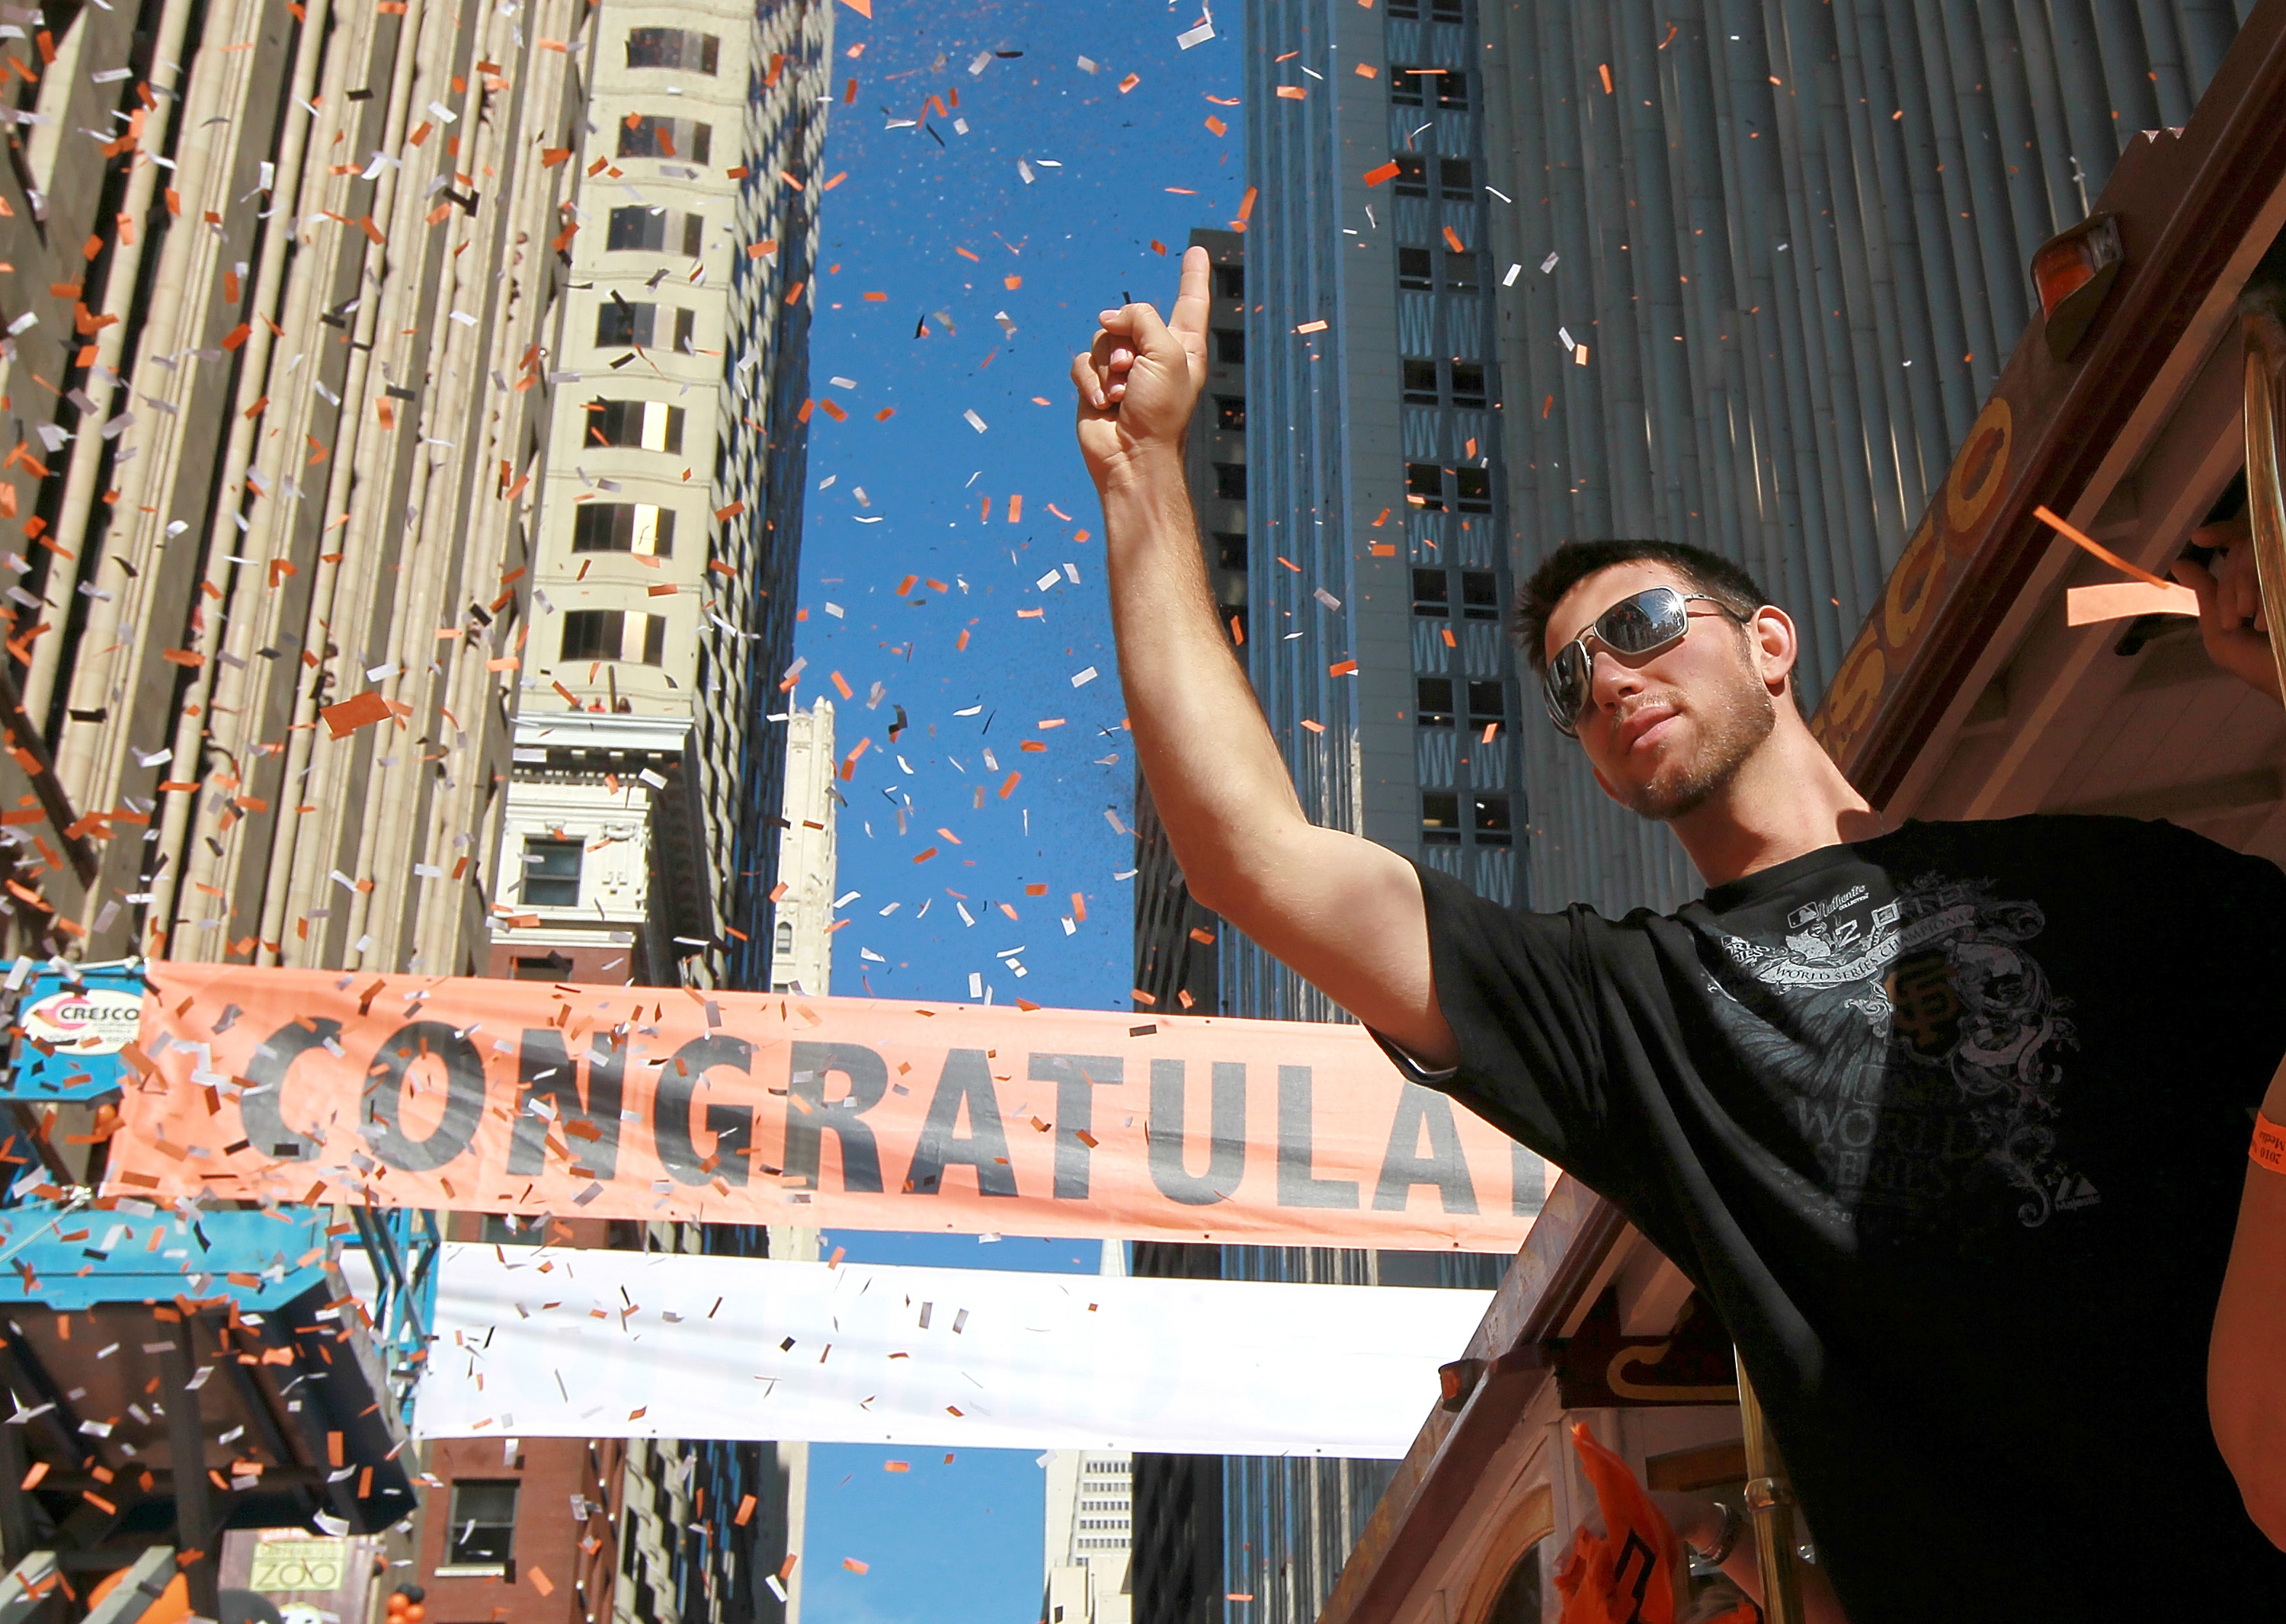 SAN FRANCISCO - NOVEMBER 03:  Madison Bumgarner of the San Francisco Giants celebrates during the Giants' vicotry parade on November 3, 2010 in San Francisco, California. Thousands of Giants fans lined the streets of San Francisco to watch the San Francis